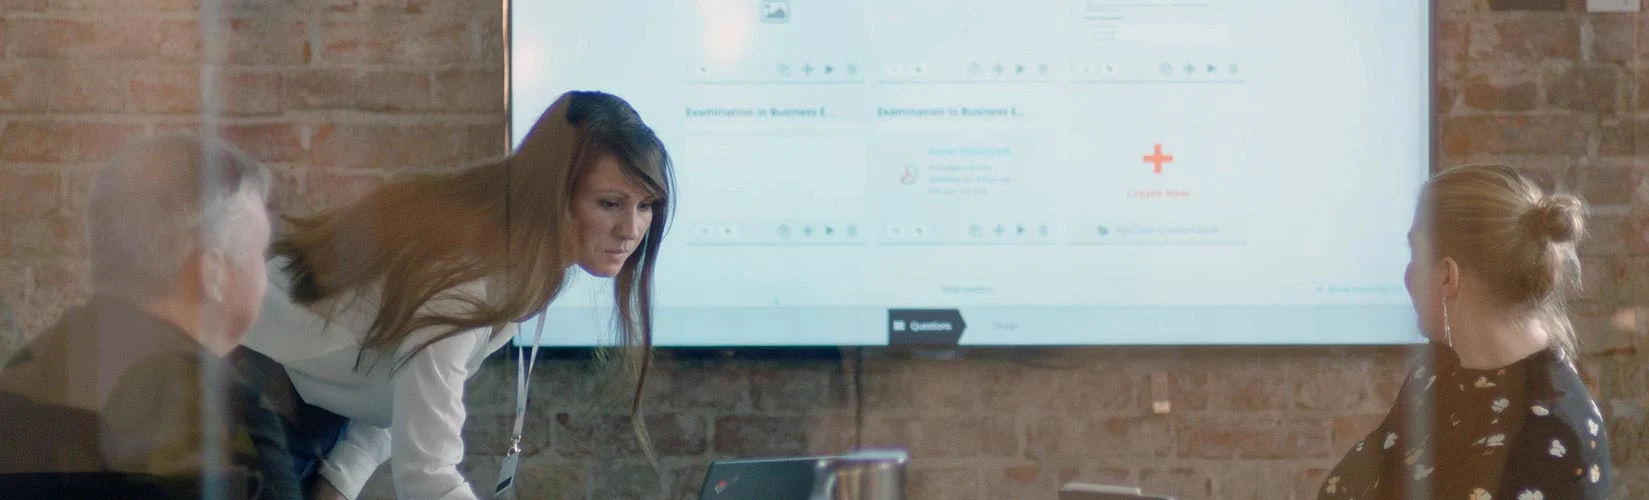 People with laptops and a lady standing next to a presentation screen